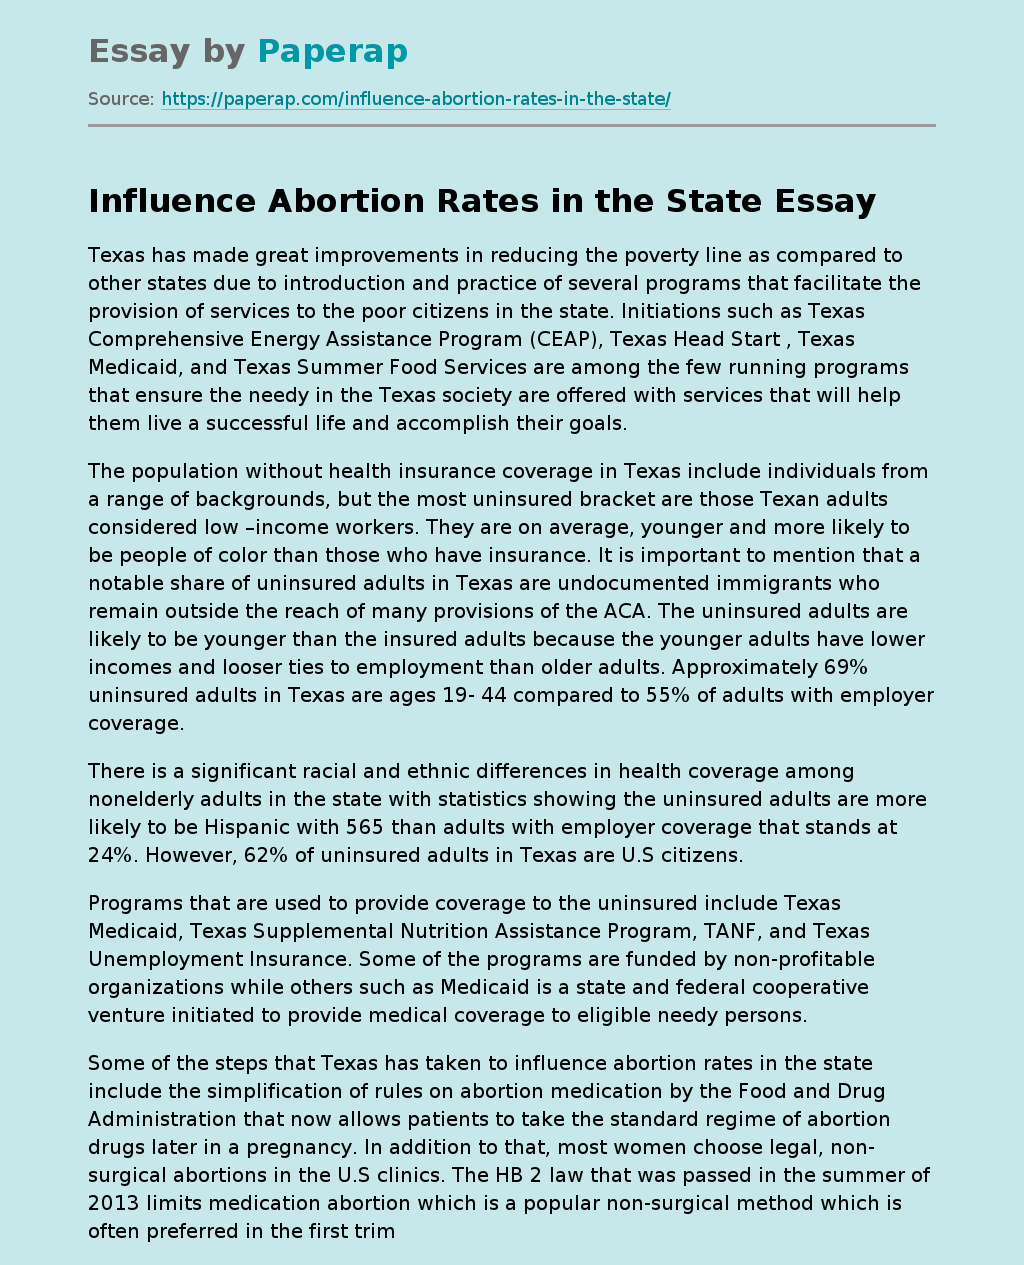 Influence Abortion Rates in the State